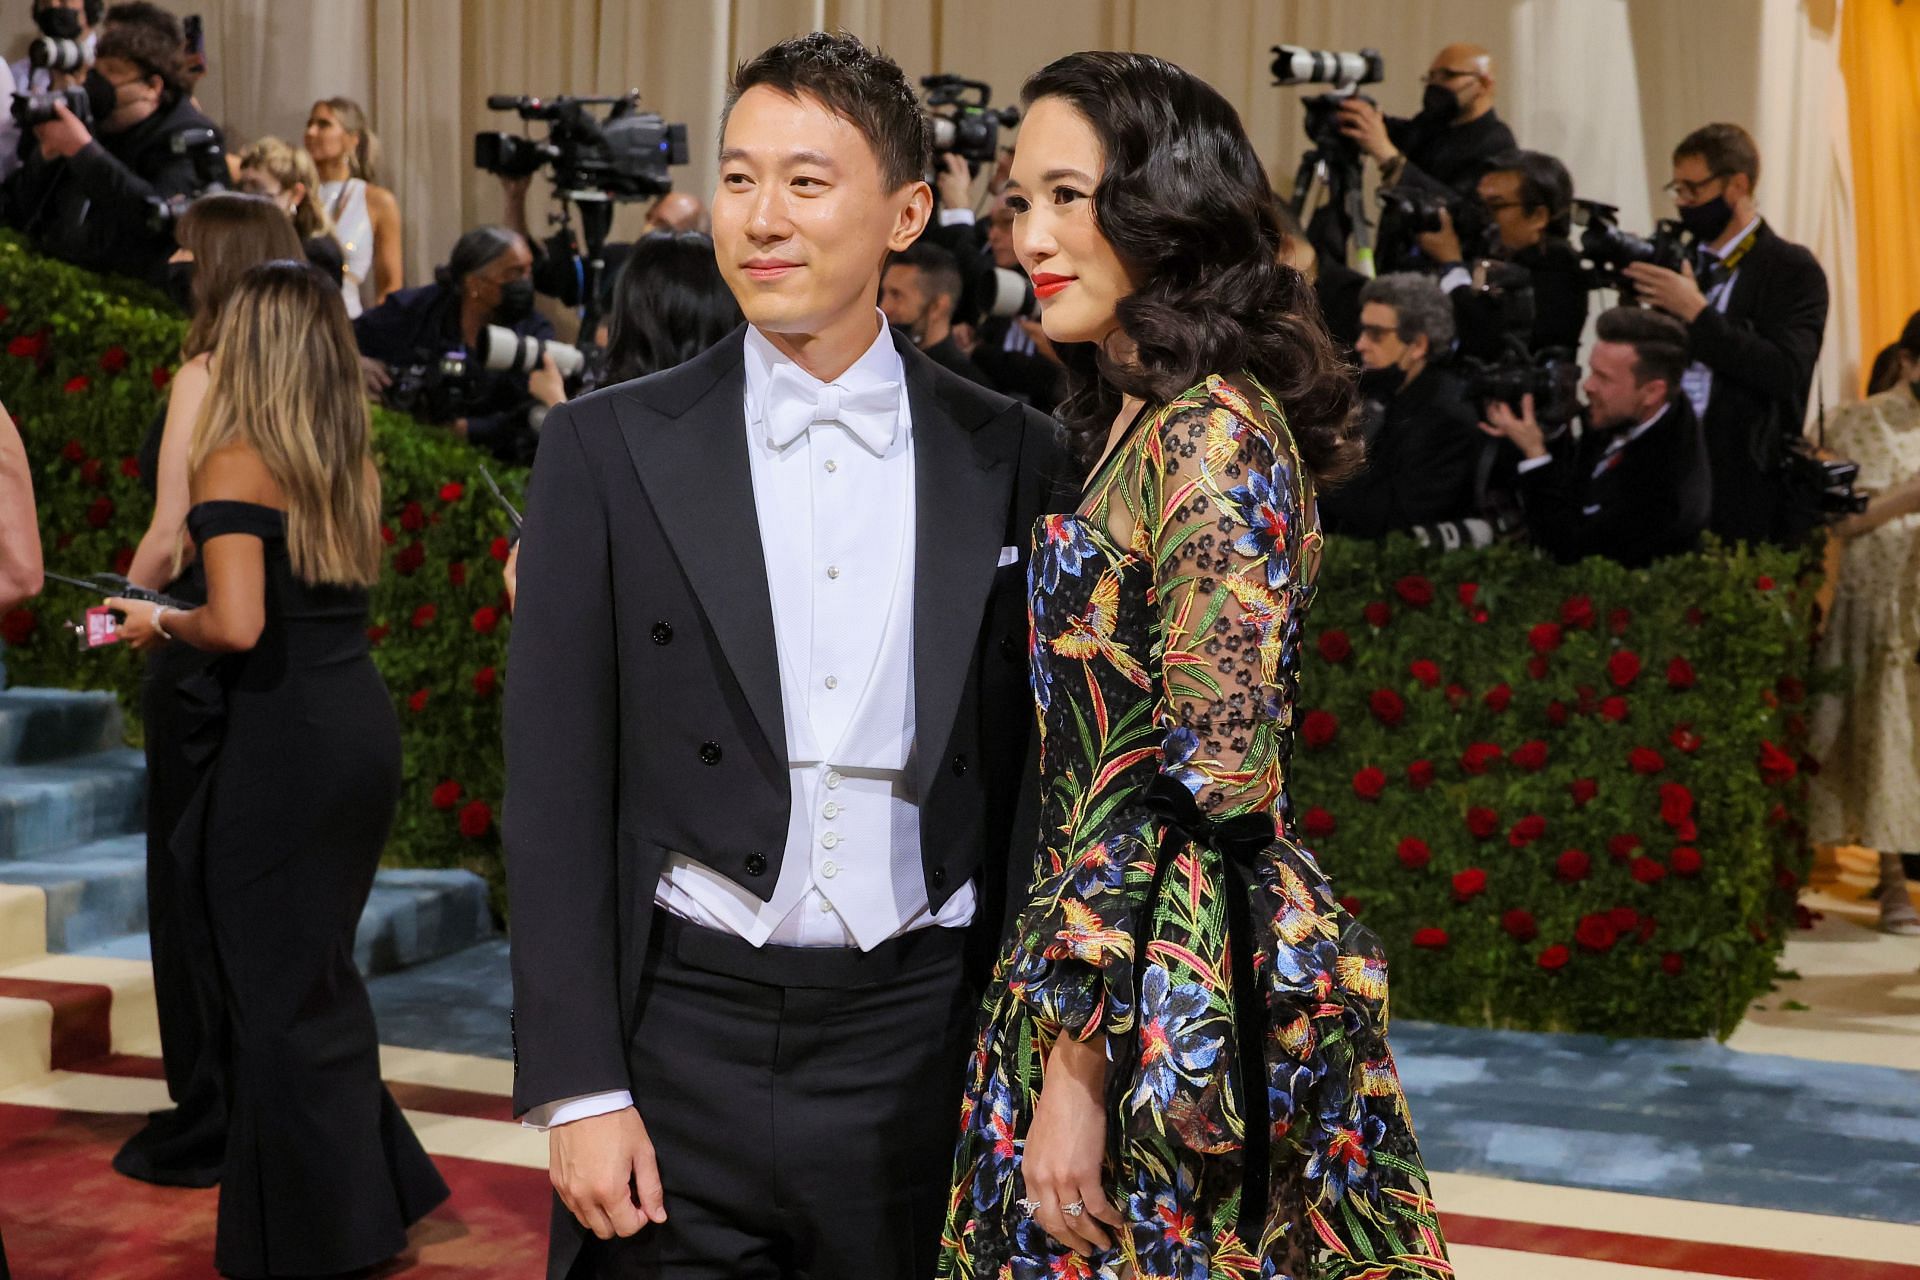 Shou Zi Chew and Vivian Kao are parents to three children (Image via Getty Images)